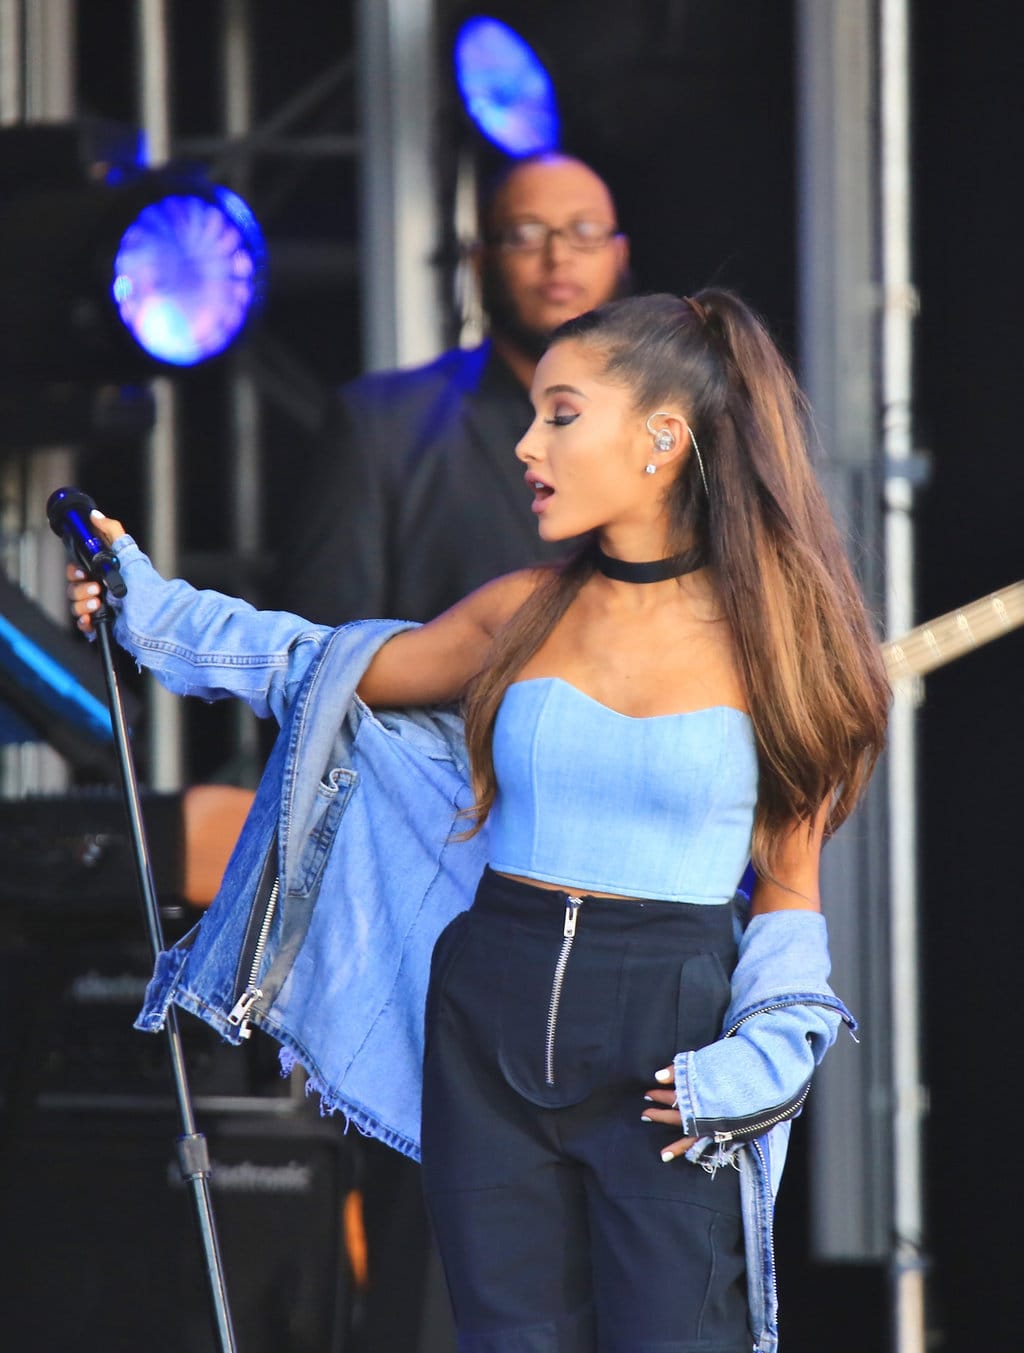 Ariana Grandes Fake Tan Fail In Crop Top And Jeans At The Airport